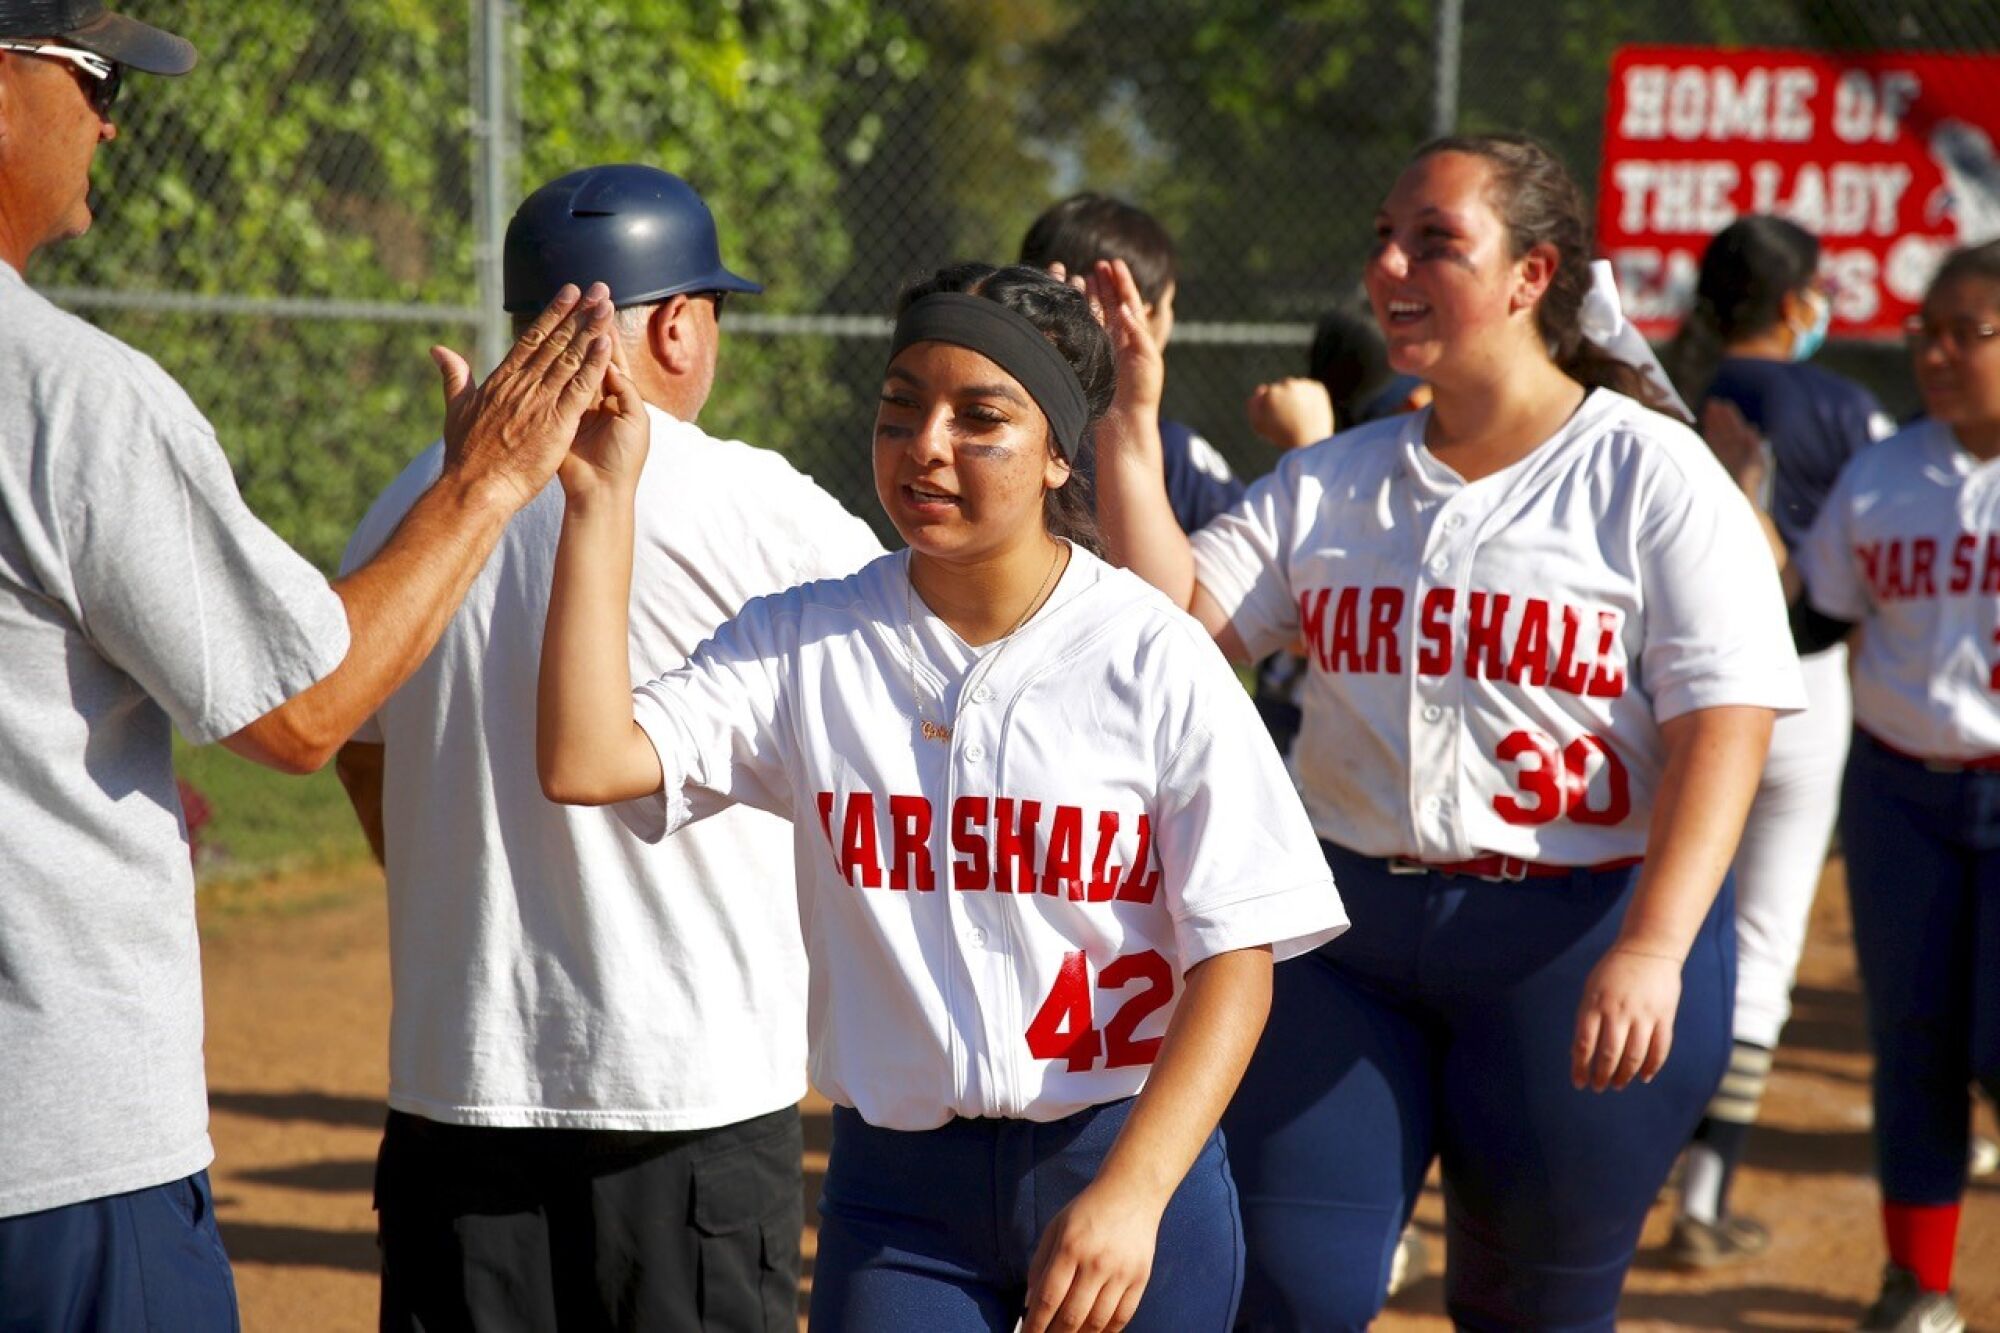 Marshall seniors Gabriela Aguilar and Rosie Agdaian lead the team's handshake line after their final home game.